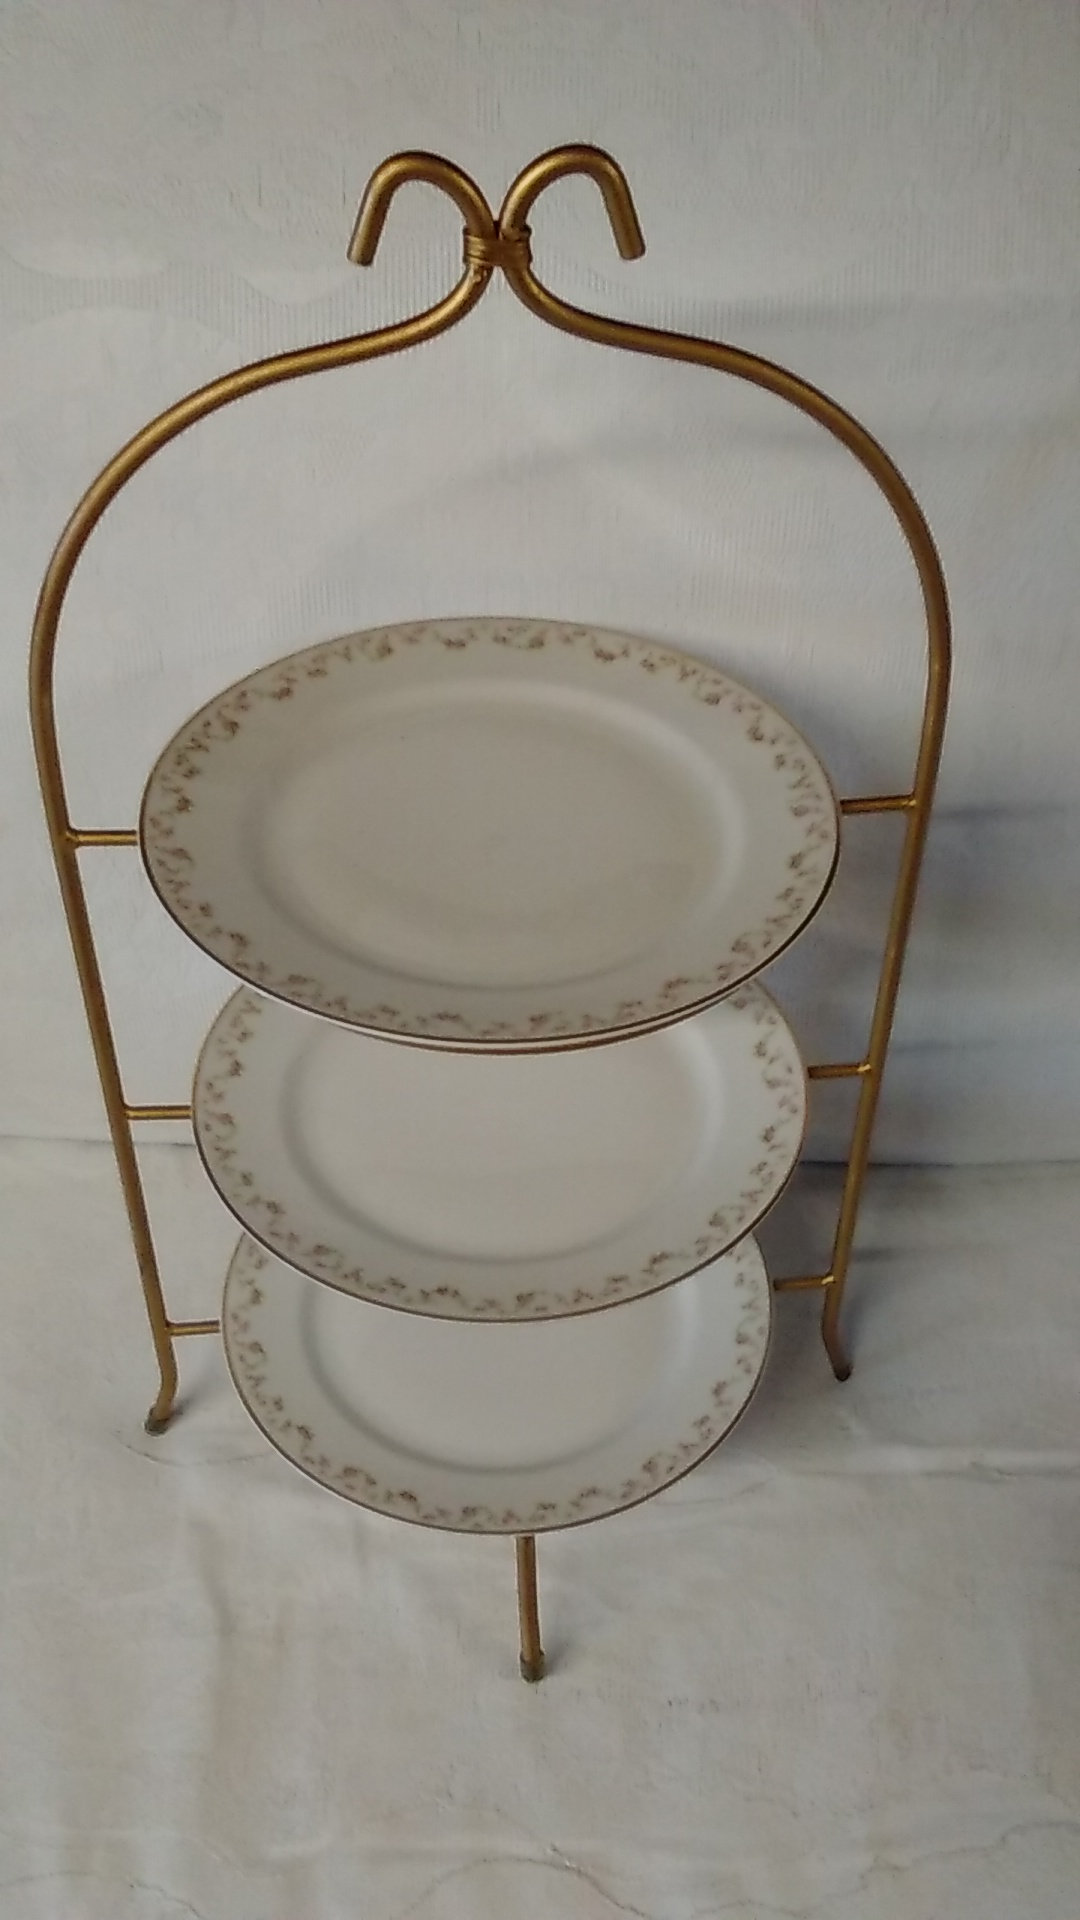 tiered serving pieces